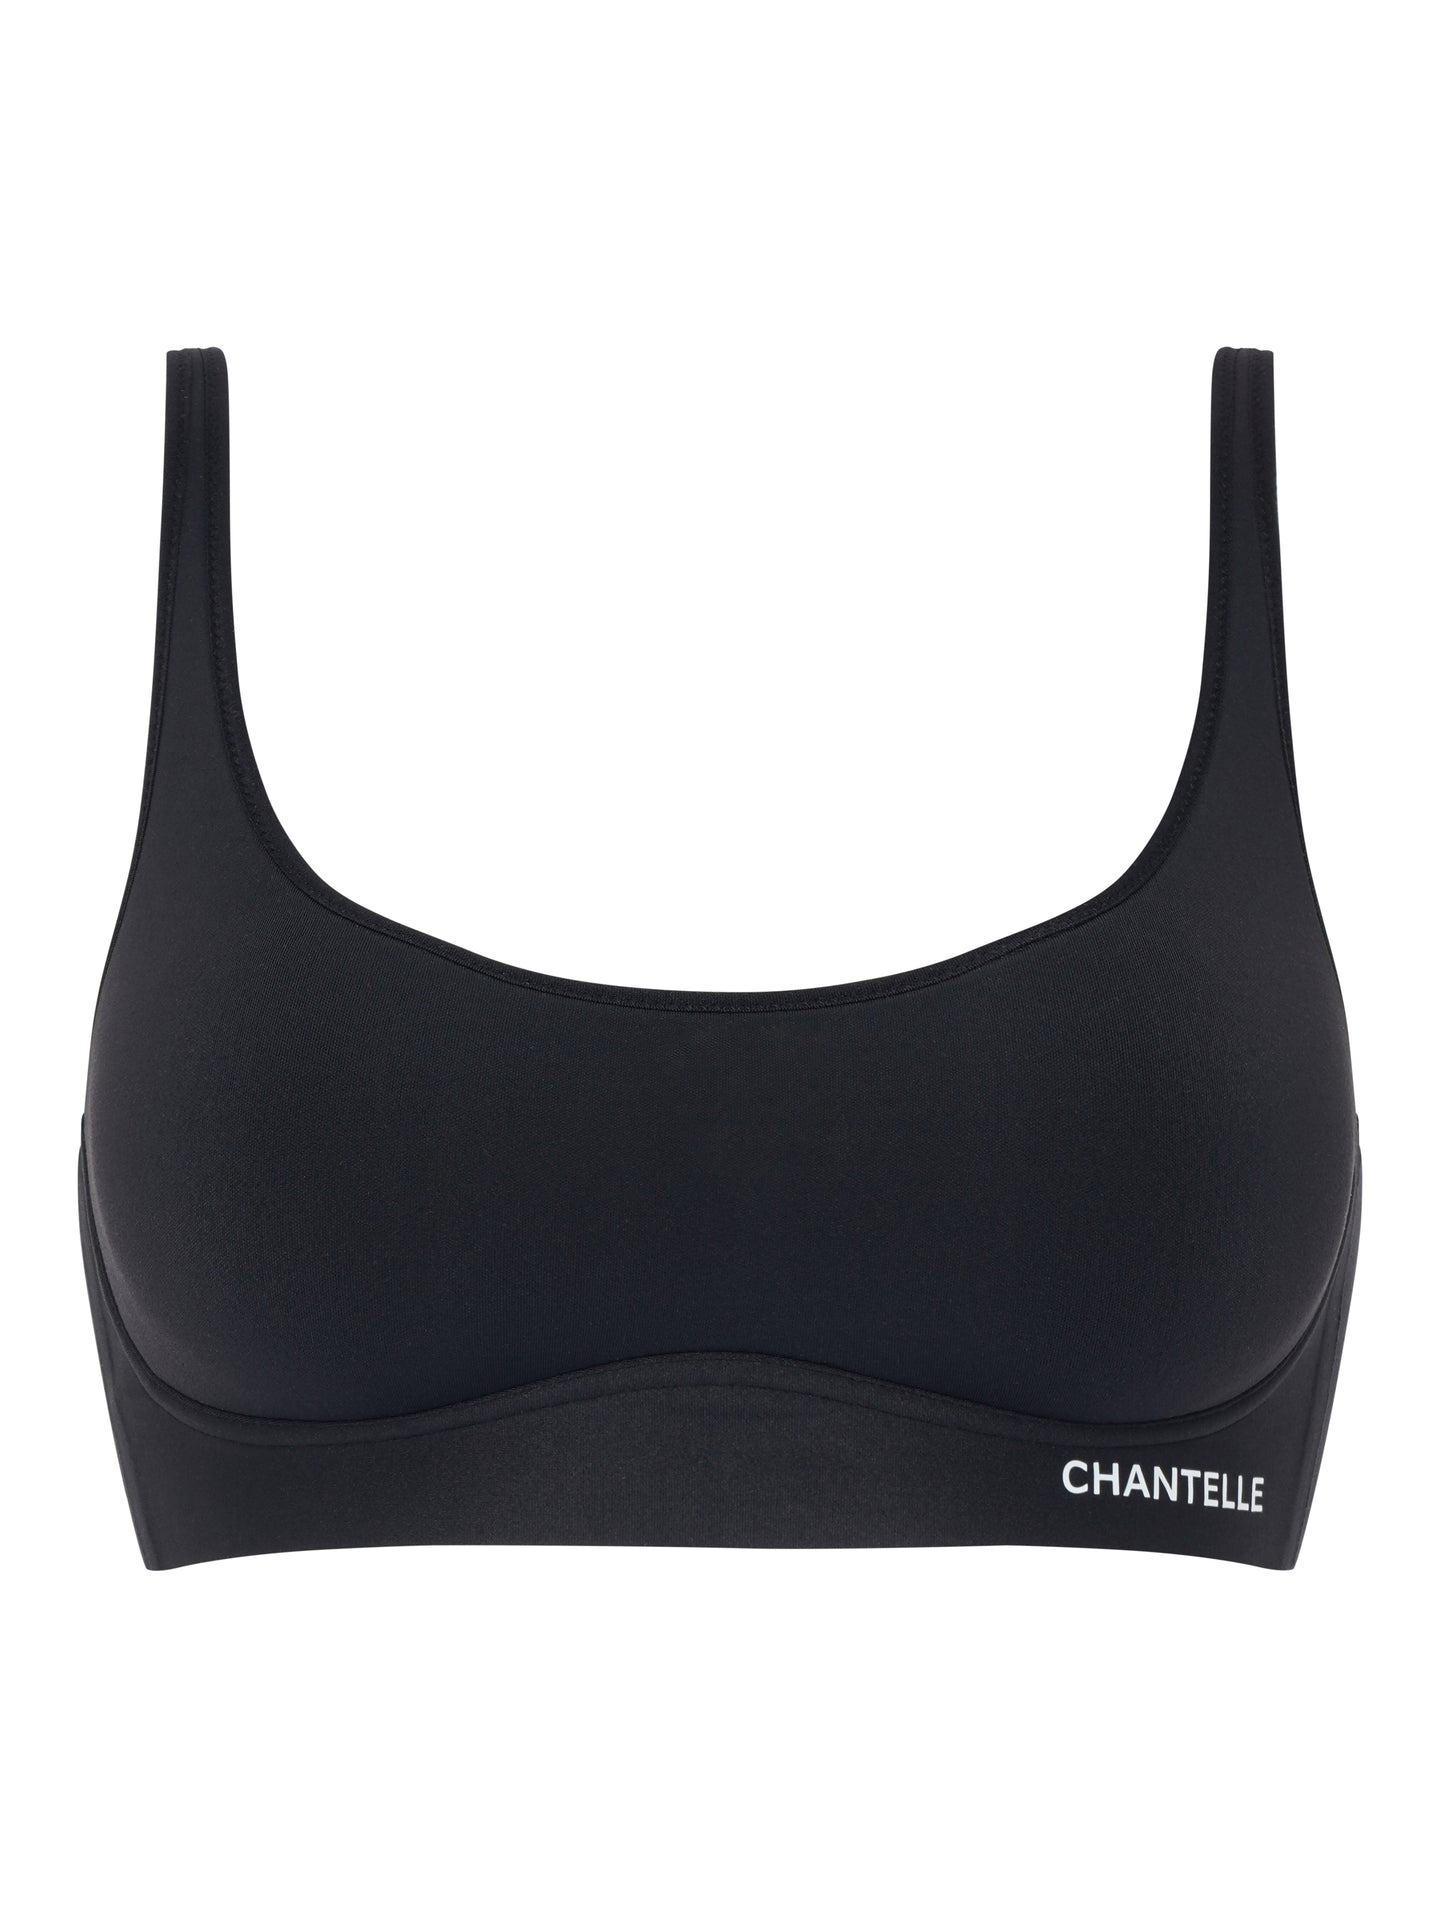 Chantelle Soft Stretch Magic Spacer